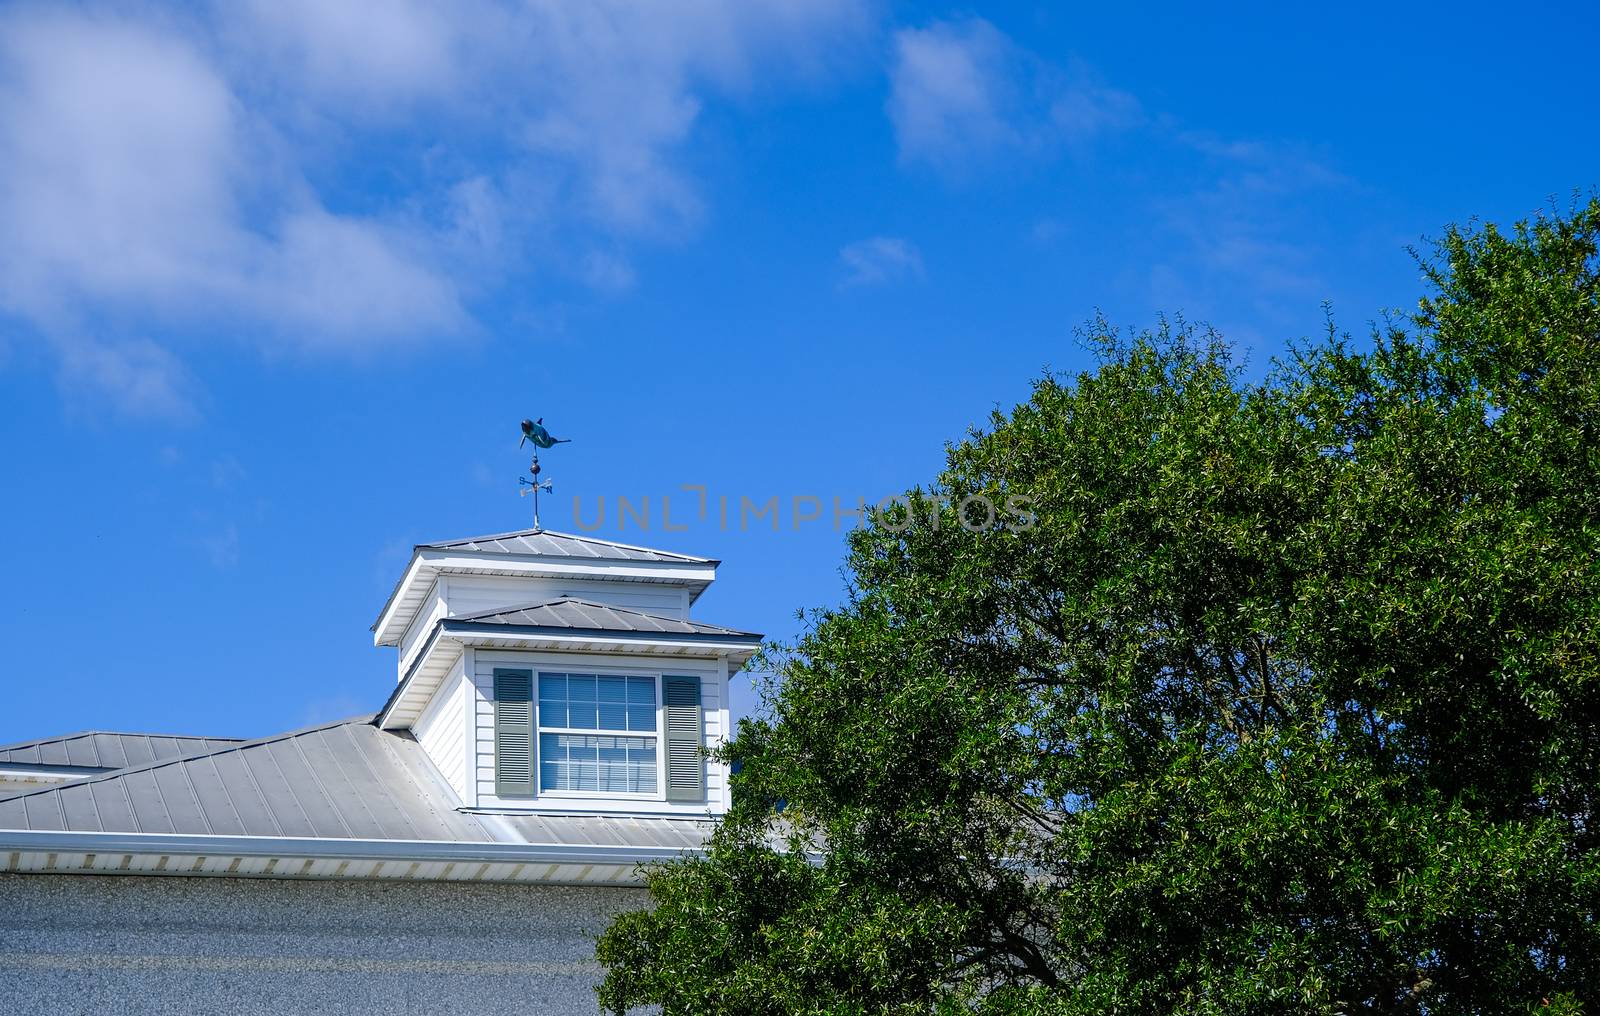 Roof Dormer with Wind Vane by dbvirago